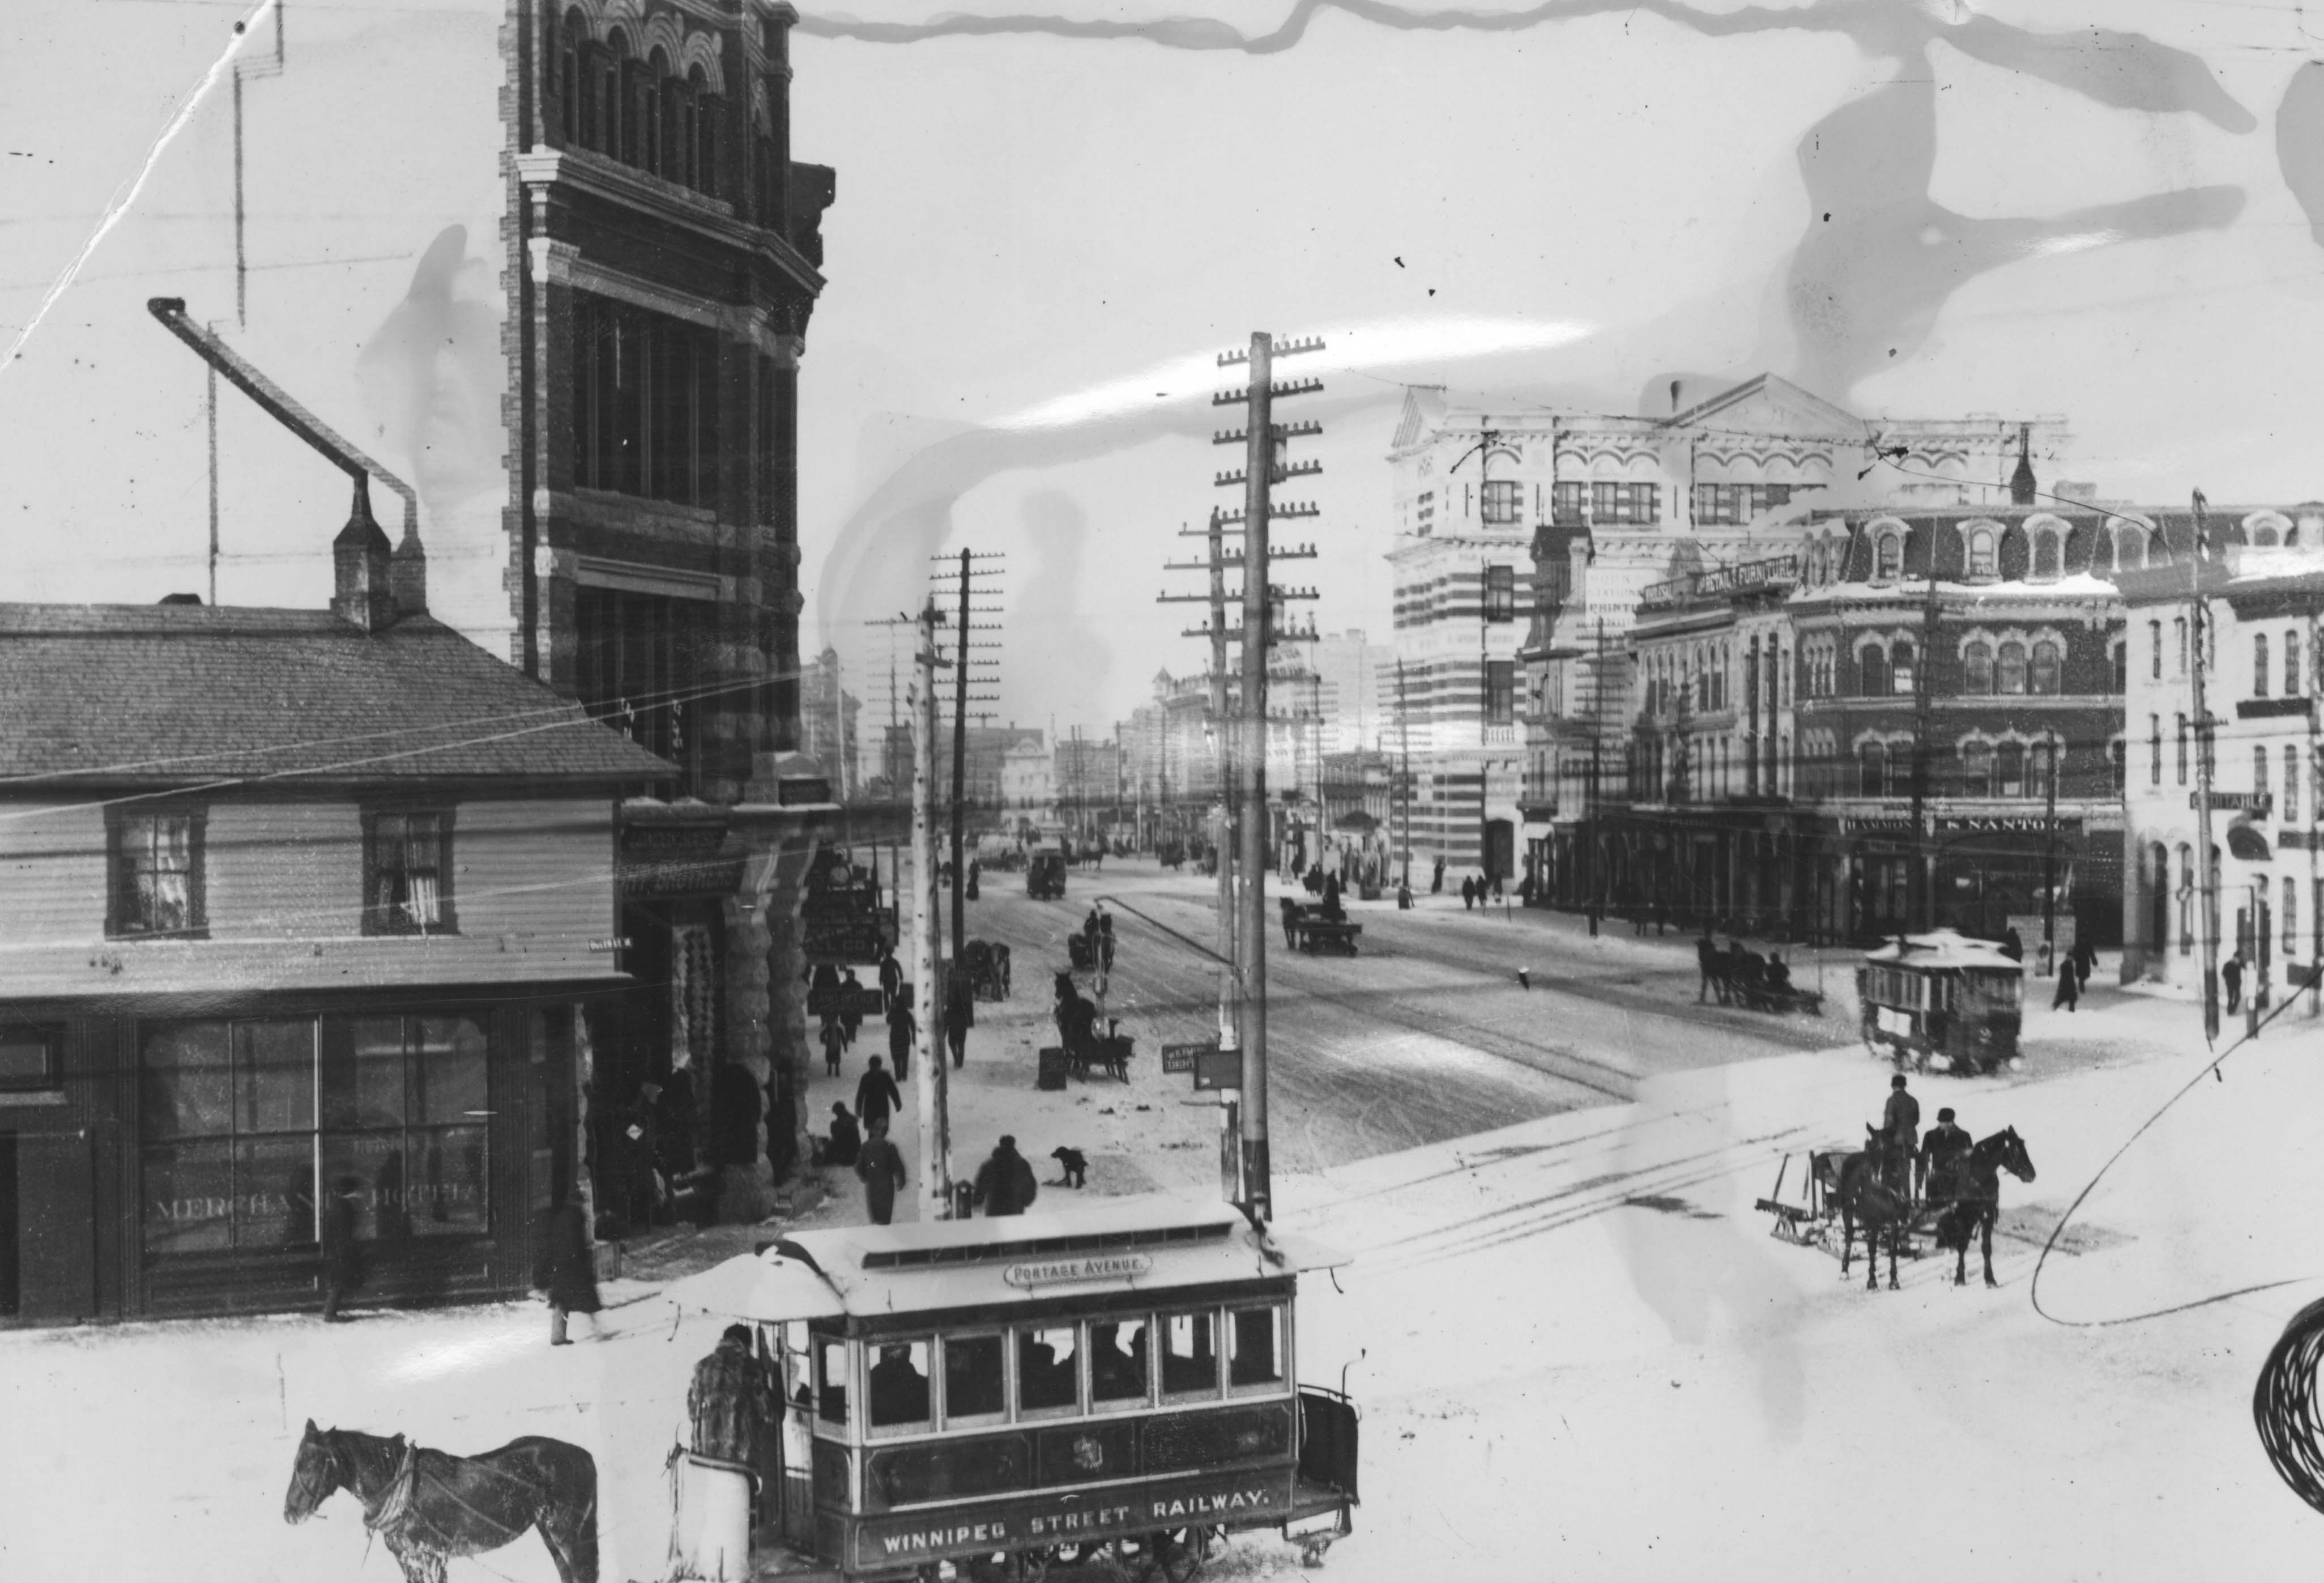 Street cars are seen on a street in an archival photo.